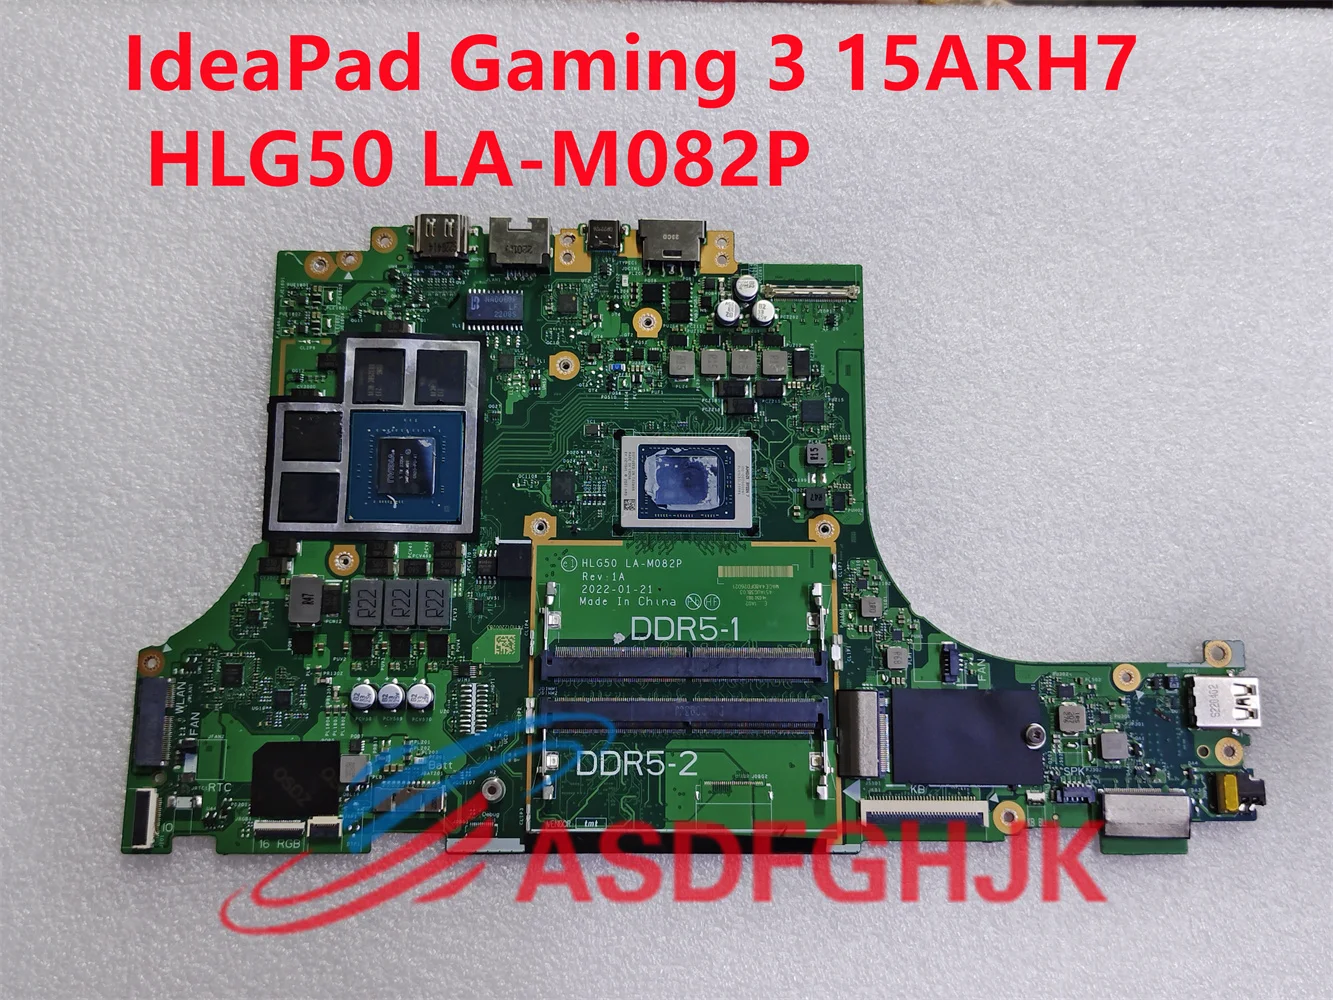 

HLG50 LA-M082P for Lenovo IdeaPad Gaming 3 (15ARH7) laptop motherboard with Ryzen 7-6800H CPU 100-000000561 and RTX3050M